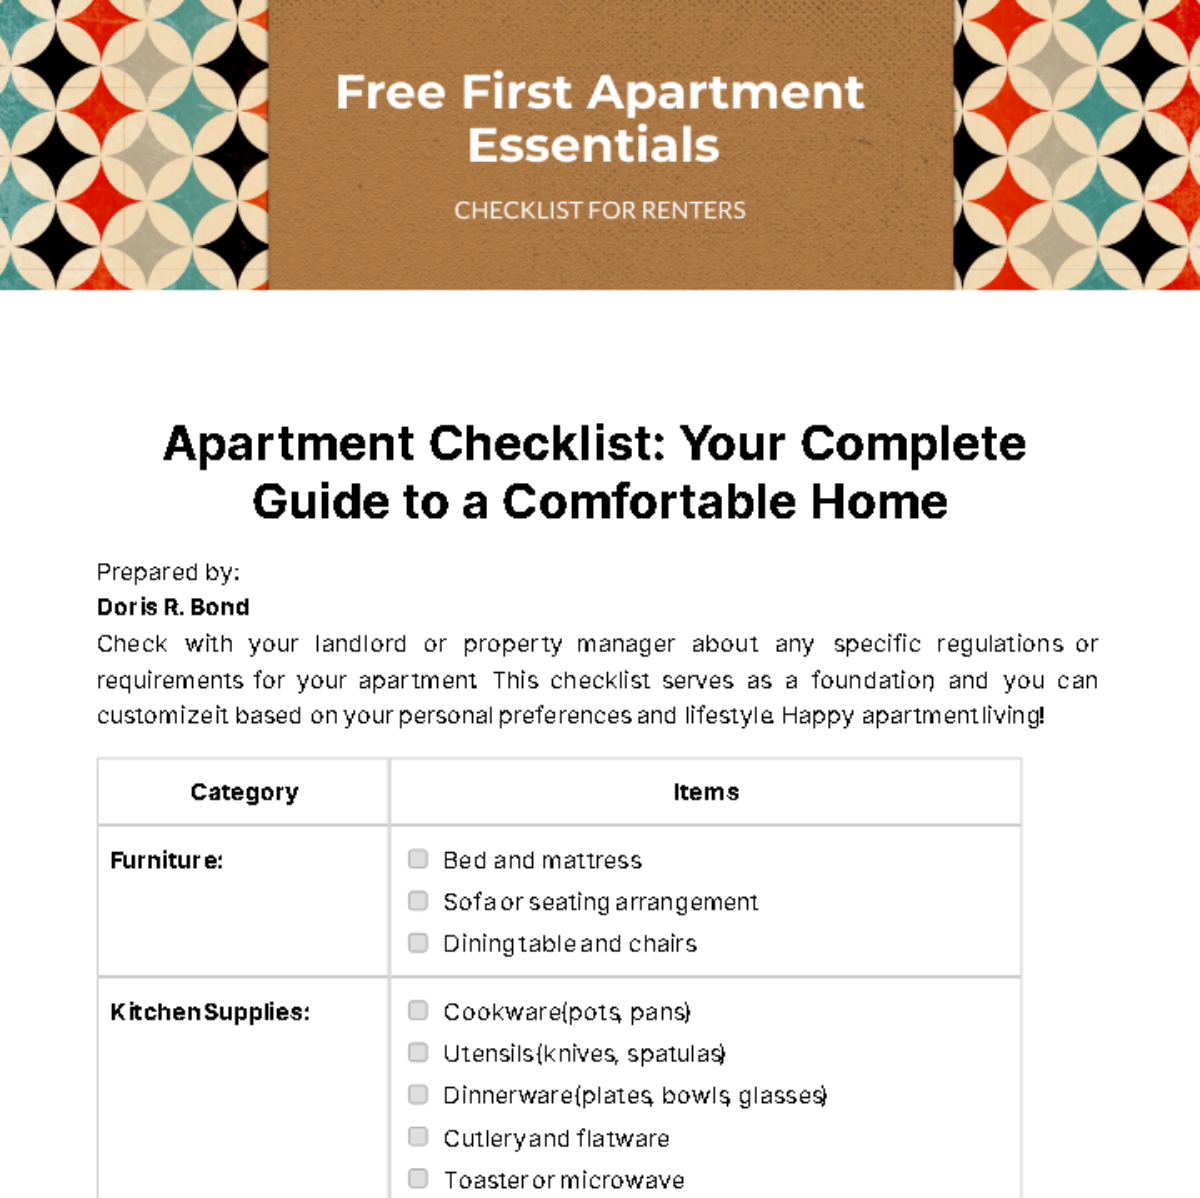 Free First Apartment Essentials Checklist For Renters Template